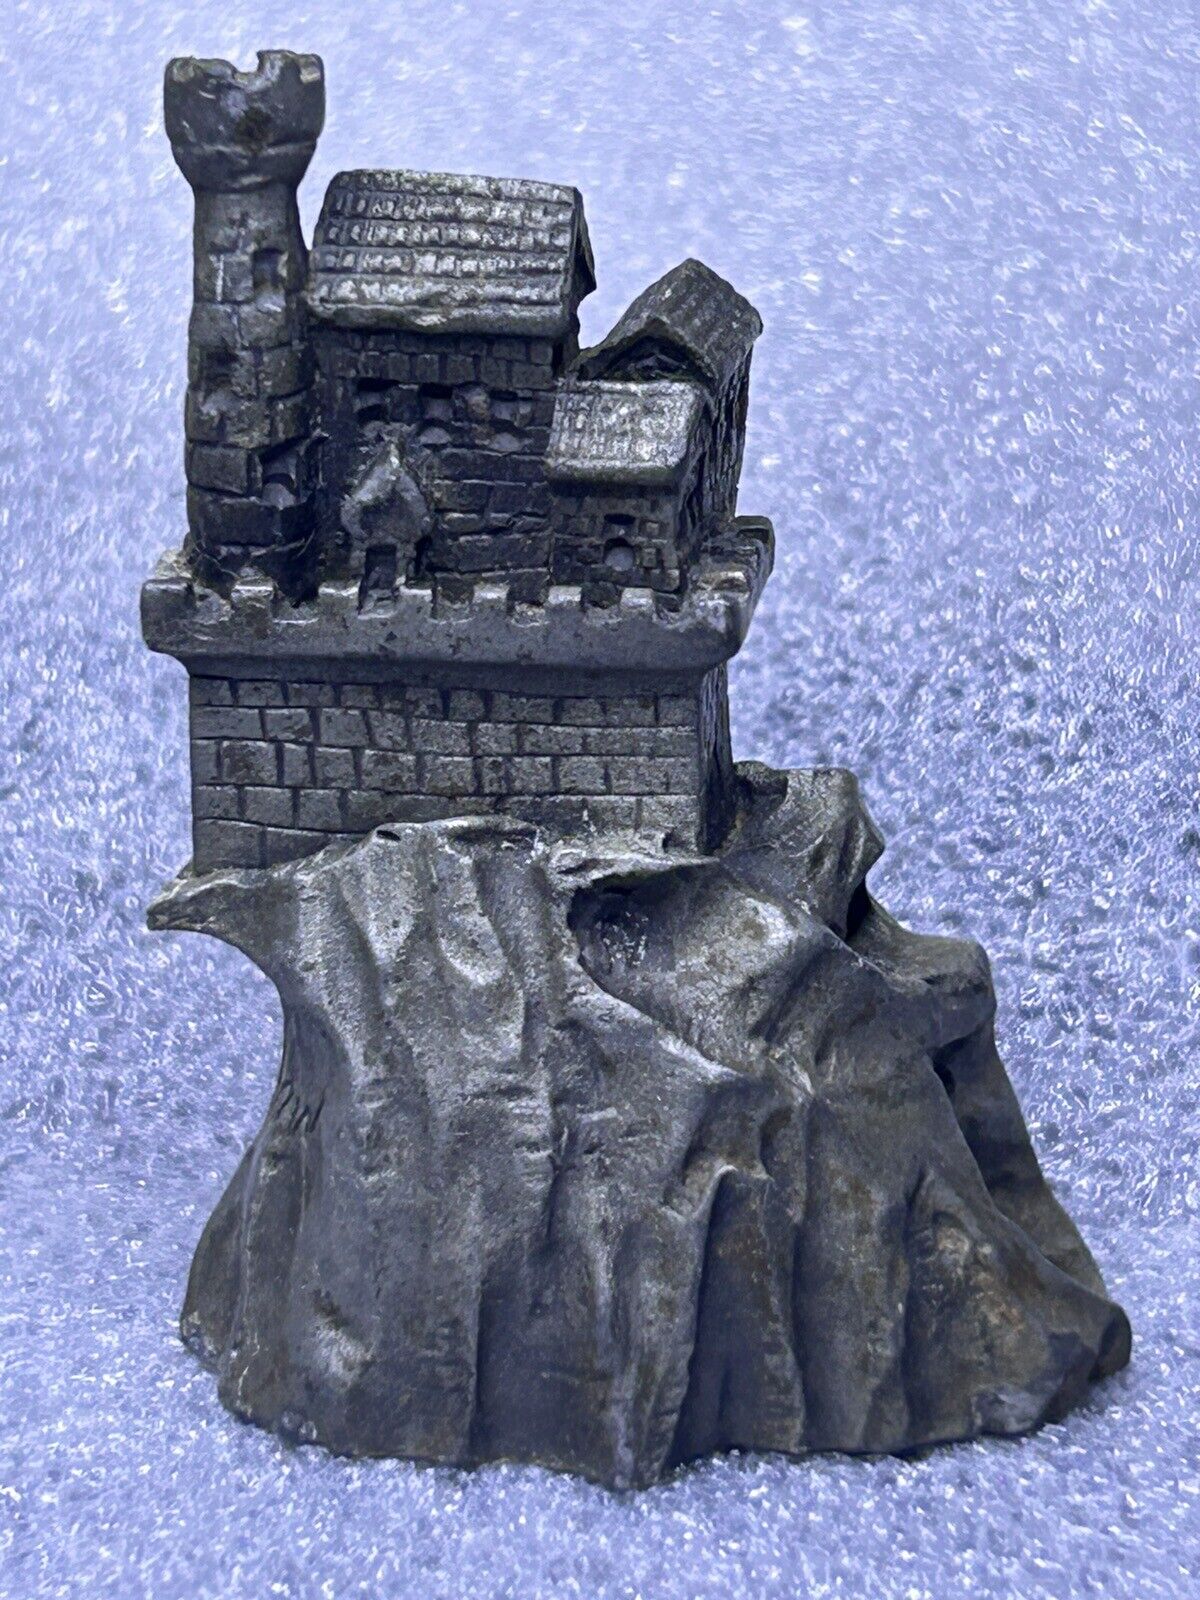 1990 Wizard Pewter Castle Signed Peter C Sedlow 2”